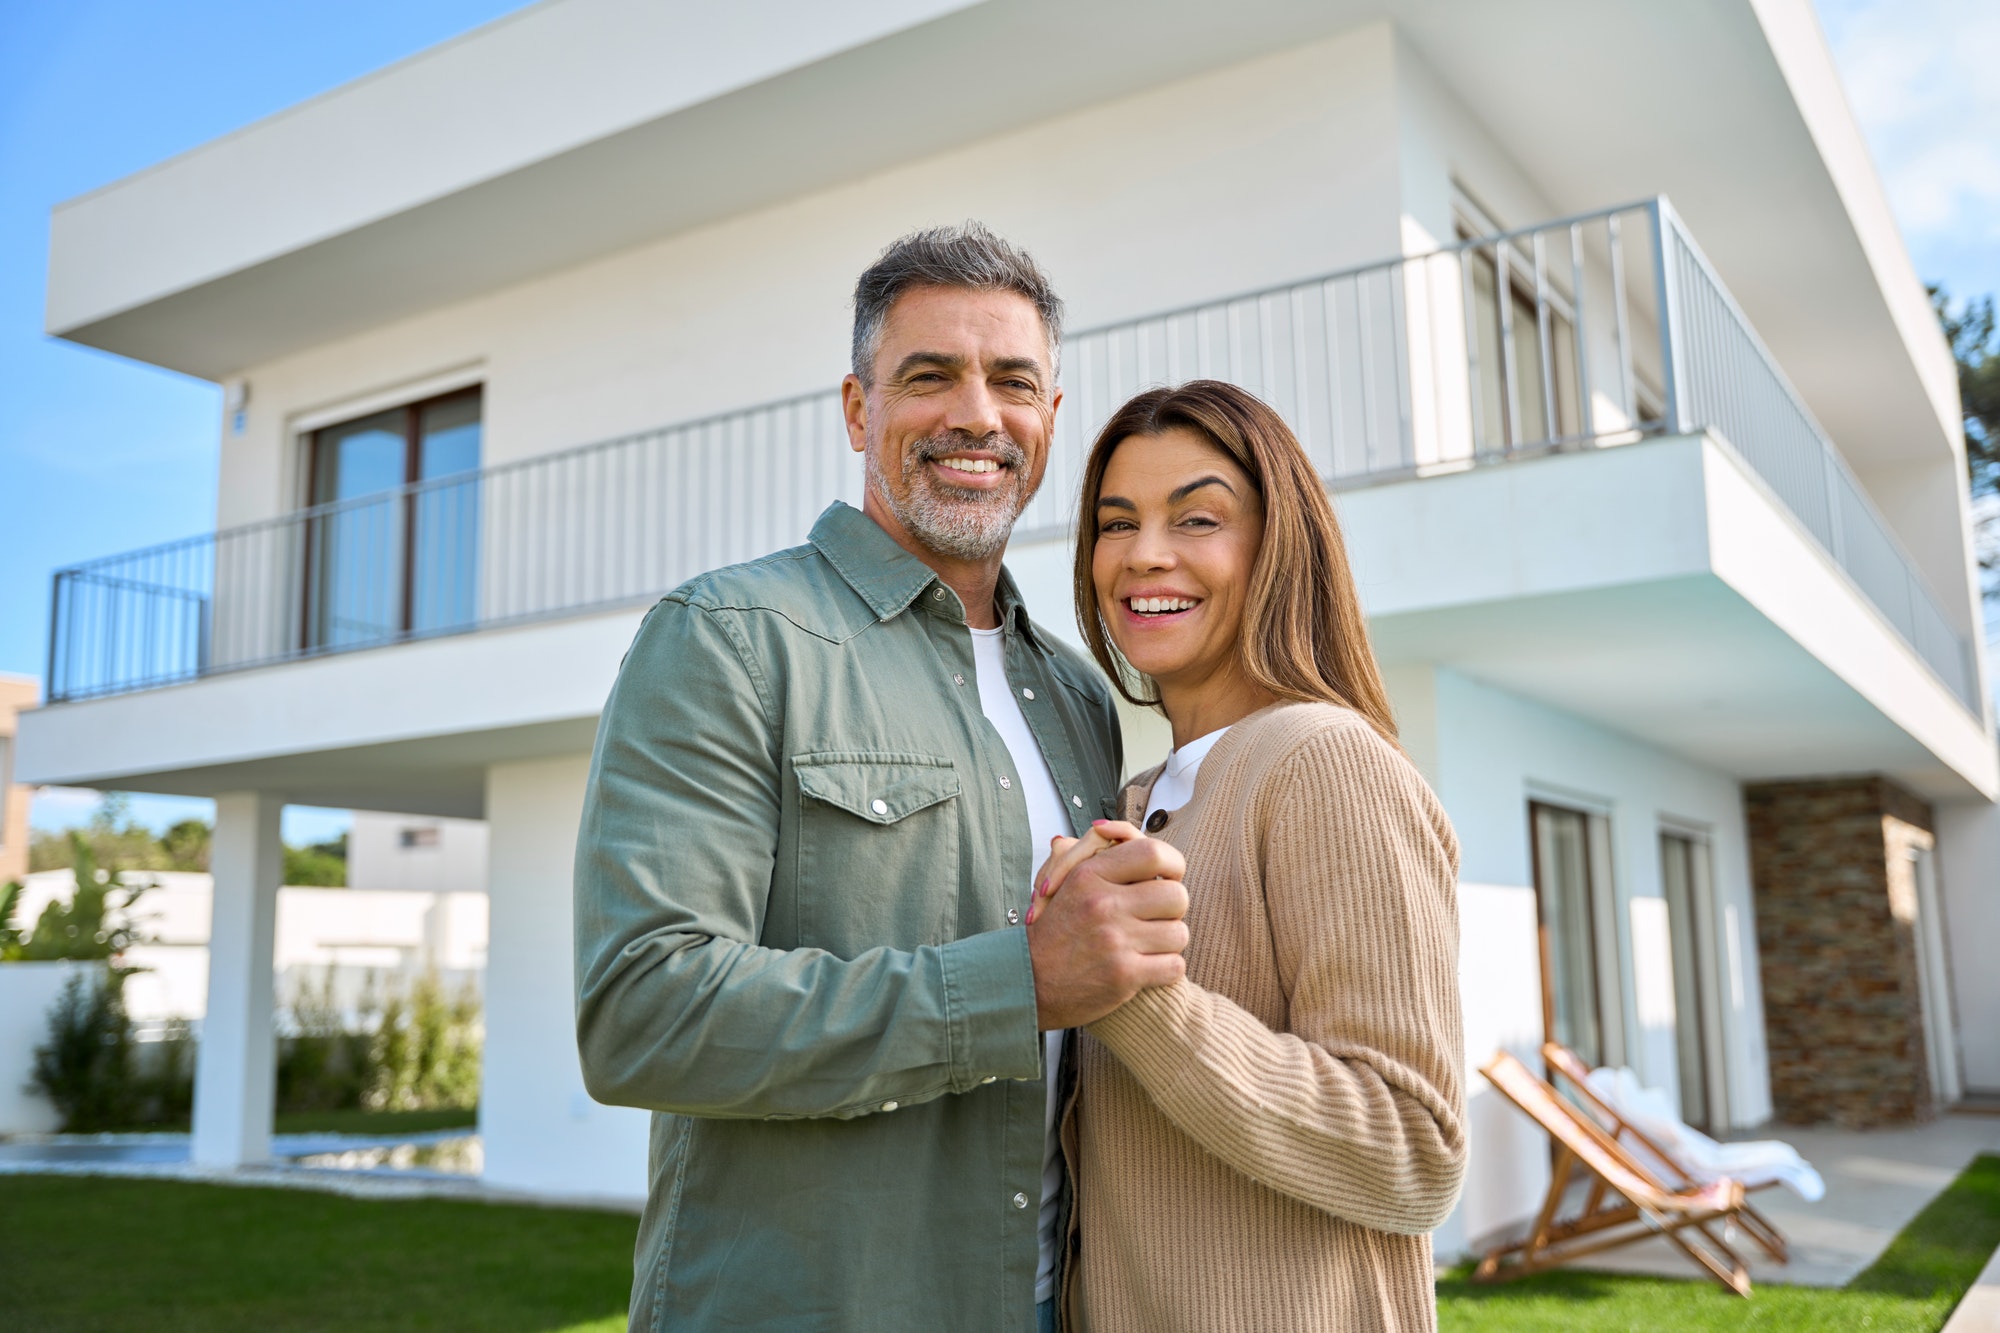 Portrait of happy mature family couple property owners standing outside house.